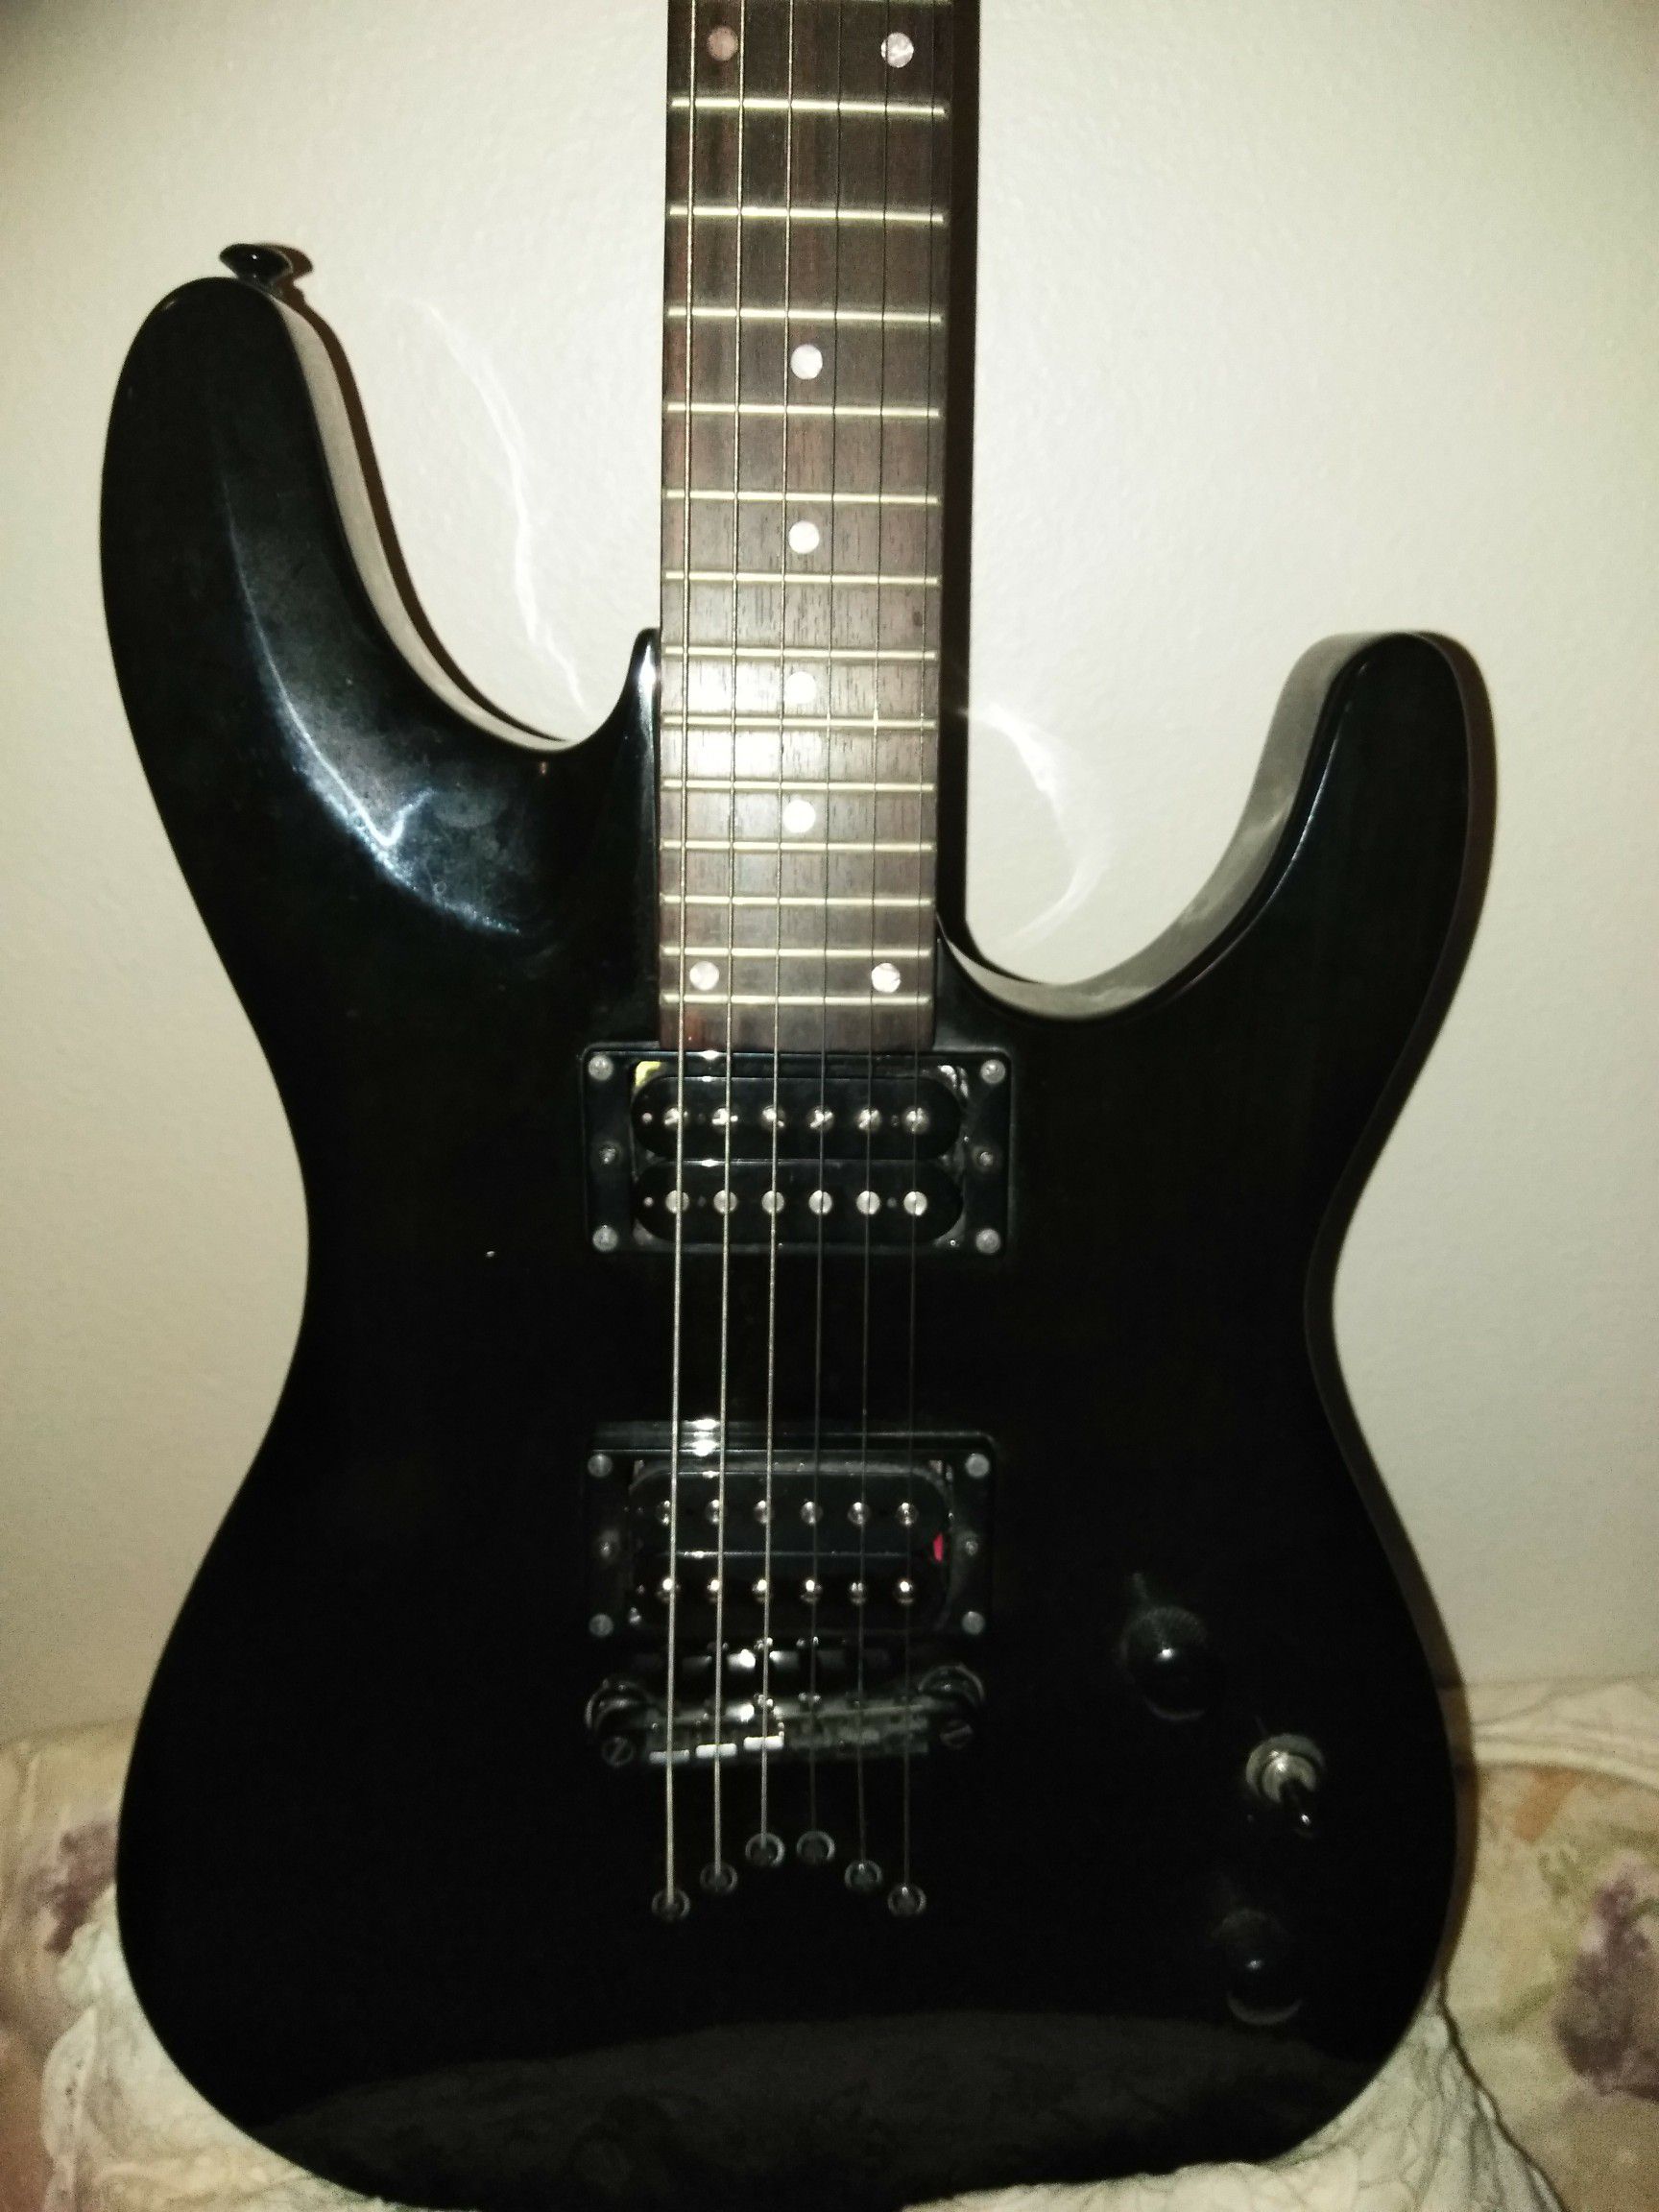 Vandetta guitar, New Never used with gig bag